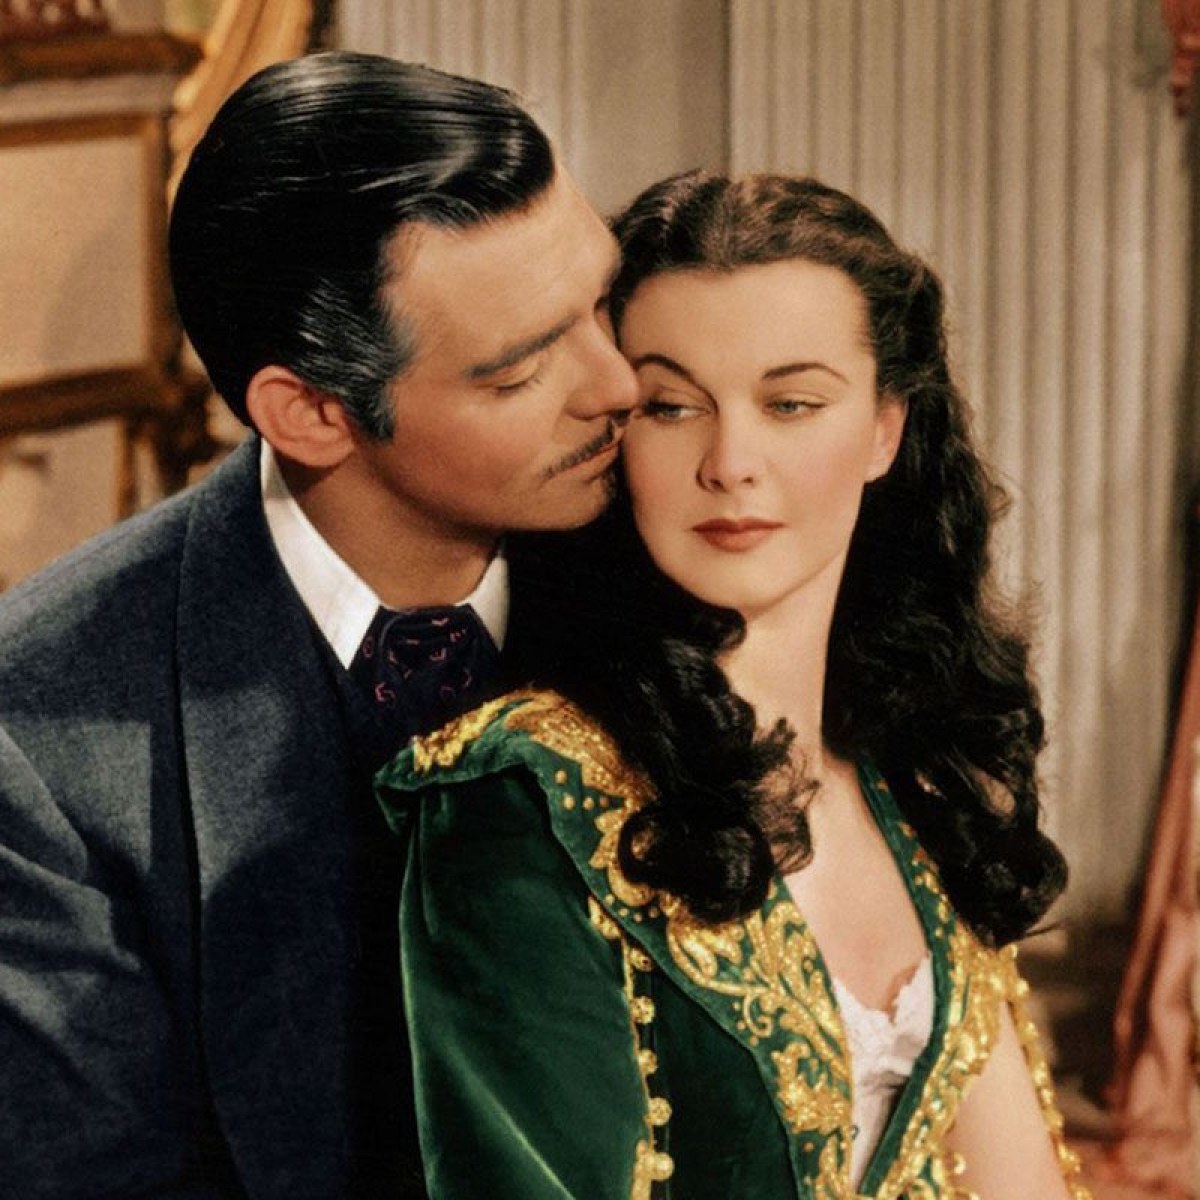 Clark Gable and Vivien Leigh as Rhett Butler and Scarlett O'Hara in the film adaptation of Margaret Mitchell's "Gone With the Wind."